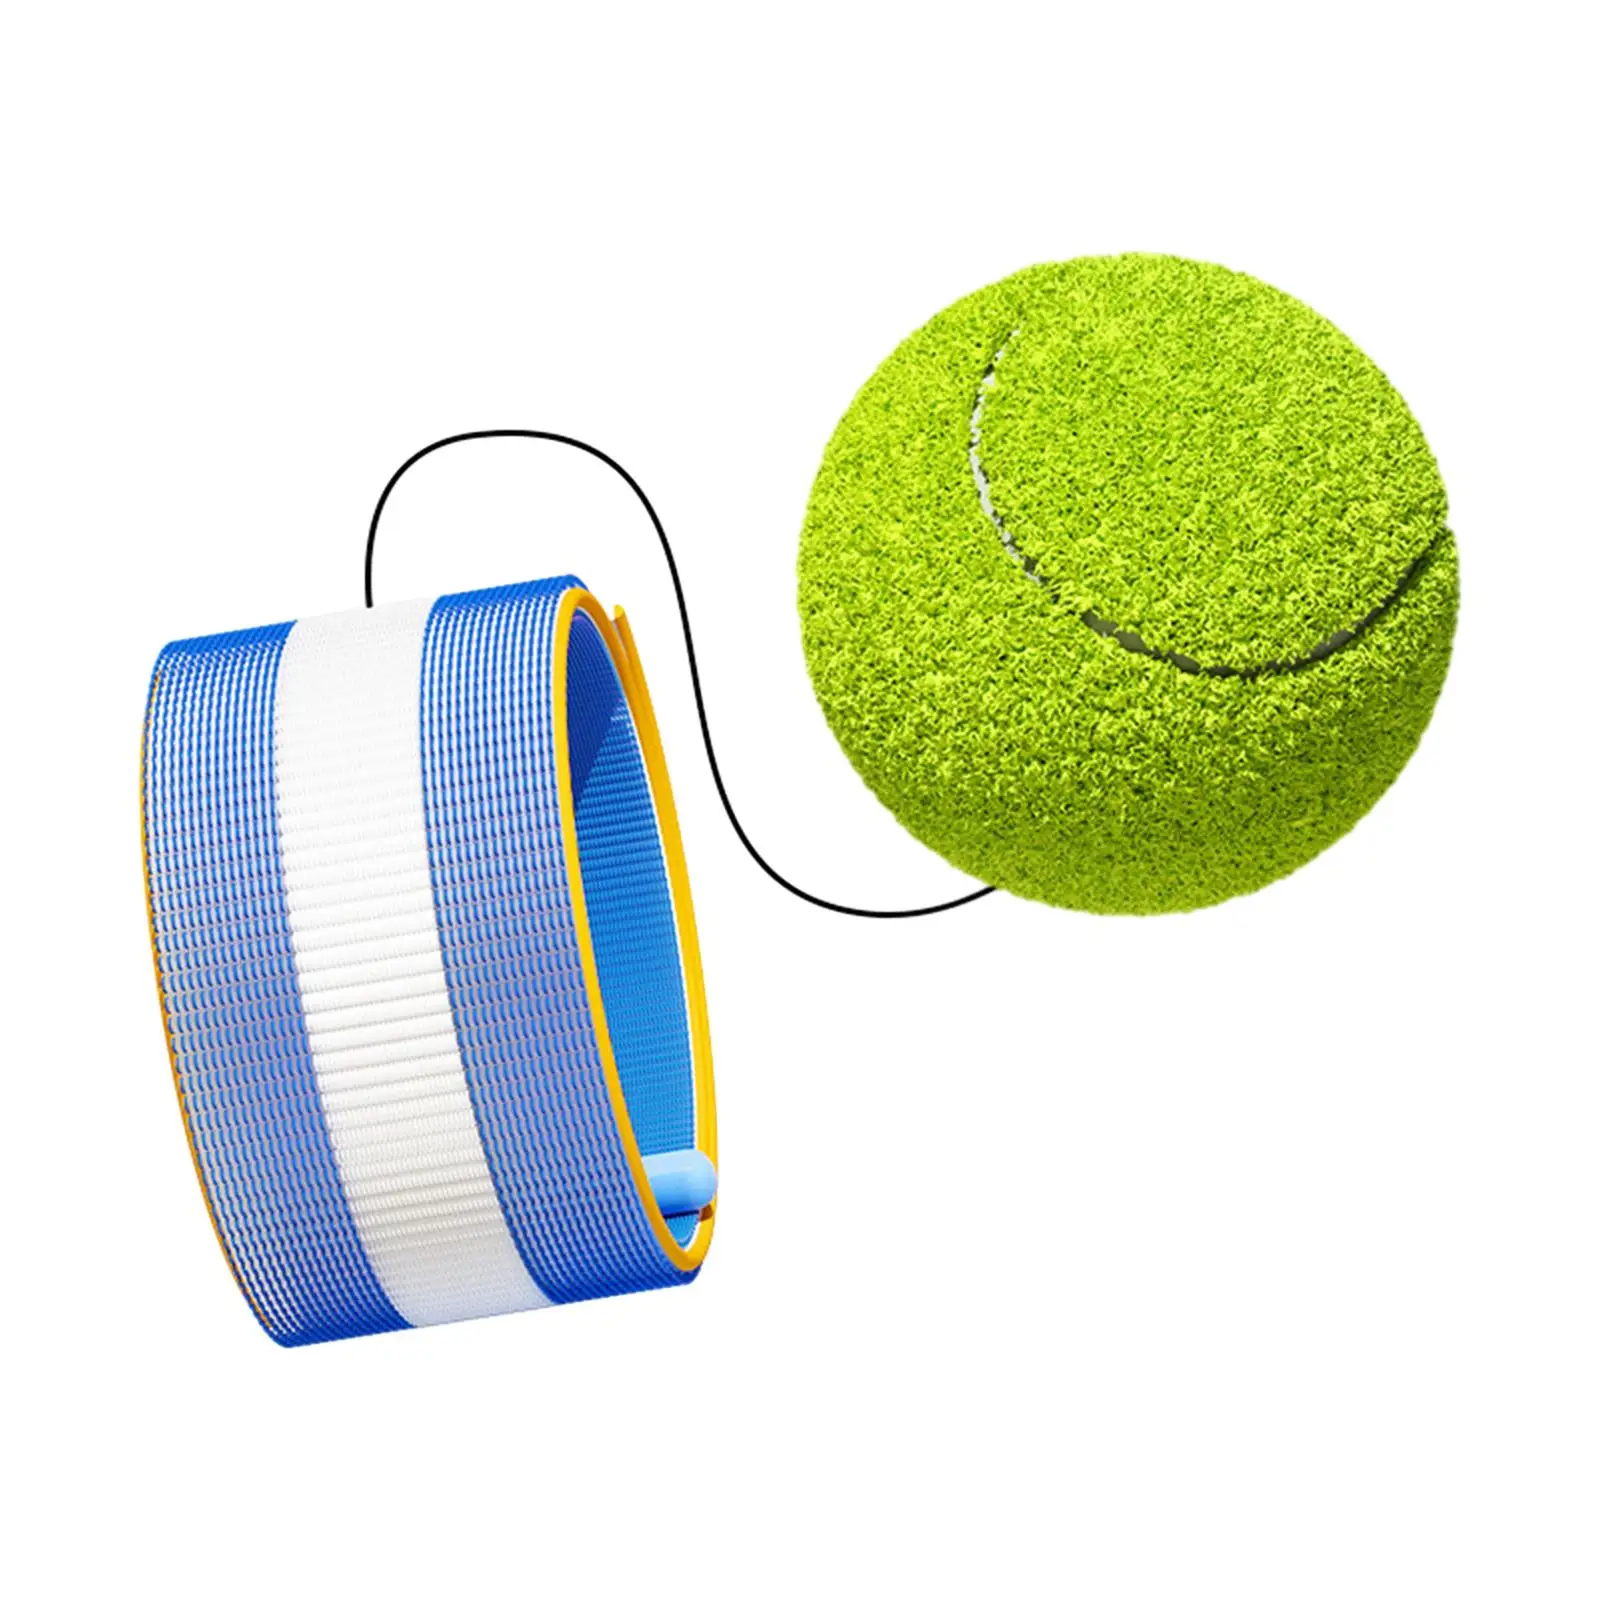 Wrist Return Ball Wrist Exercise Sports 2.36inch Baseball Hand Eye Coordination Trainer Wrist Band Ball for Party Favor Toys